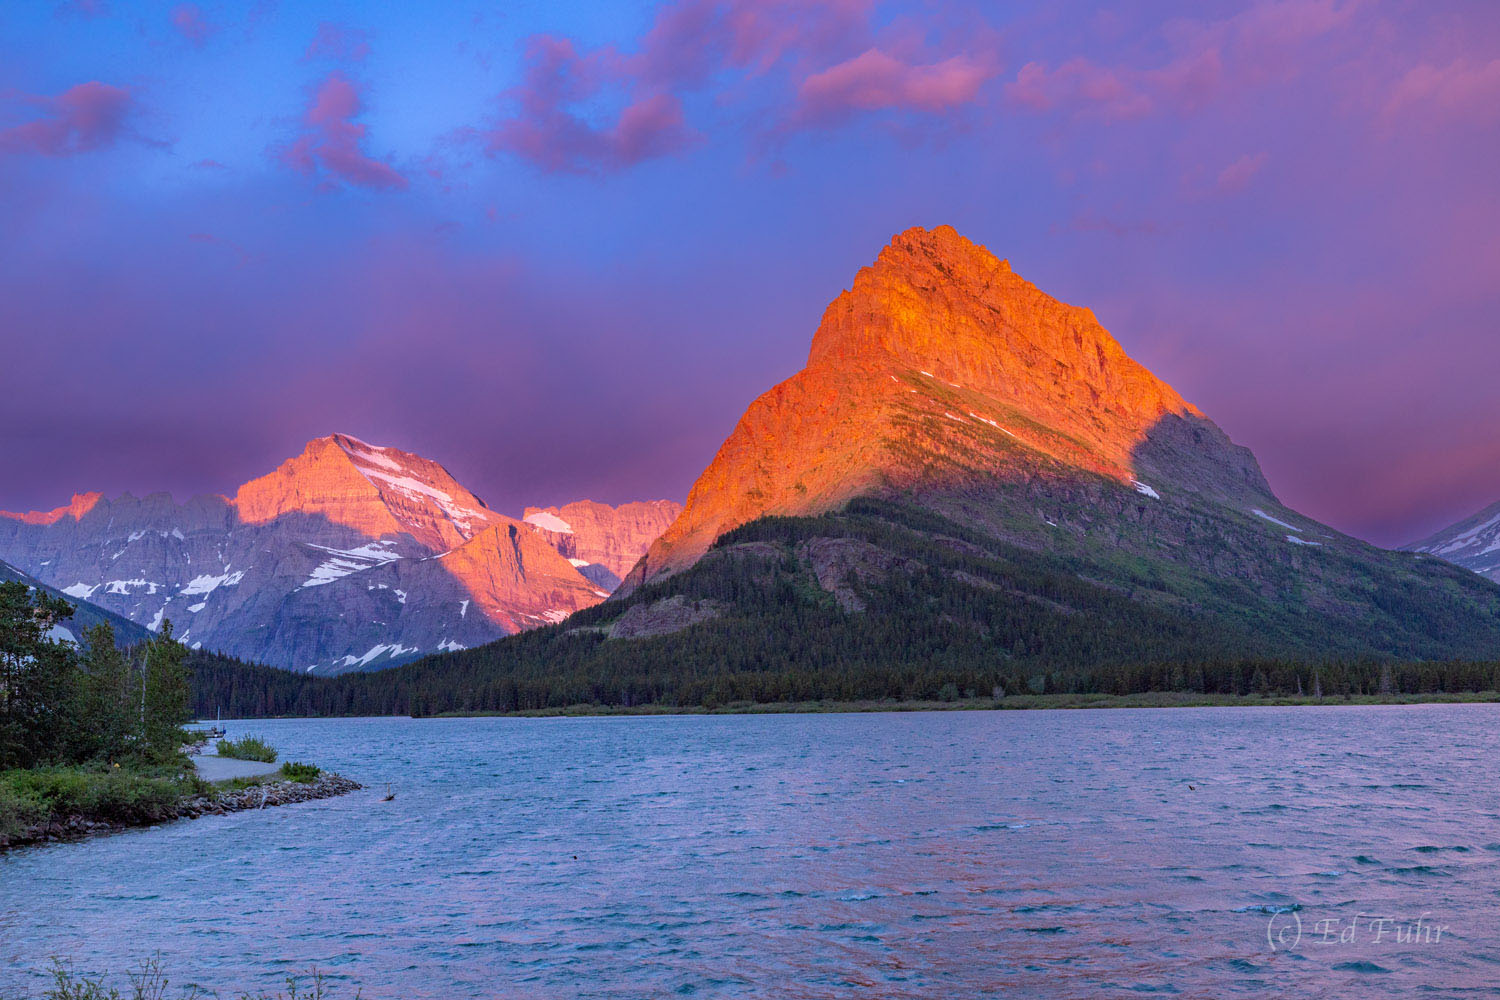 Grinnell Point glows at sunrise on the western shores of Swiftcurrent Lake across from Many Glacier Hotel.